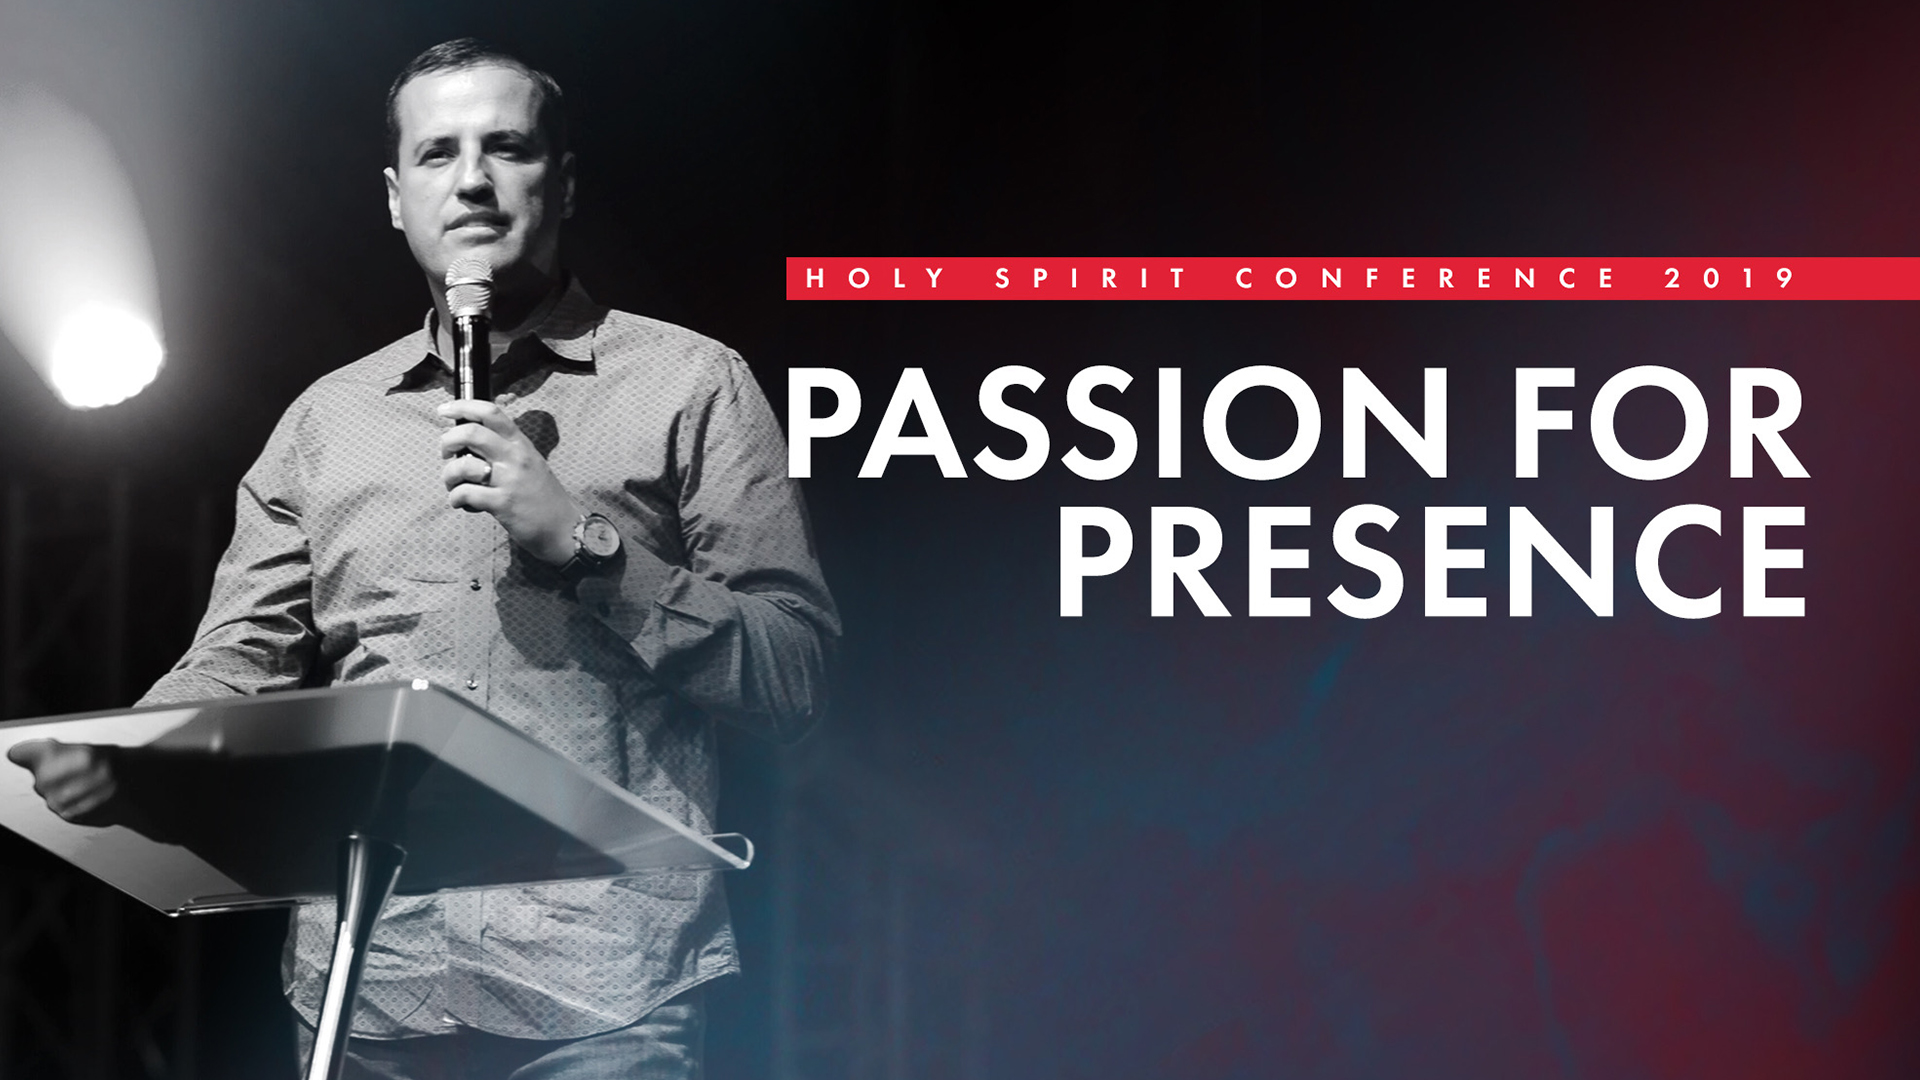 Andres Bisonni shared about passion for the presence of God&hellip